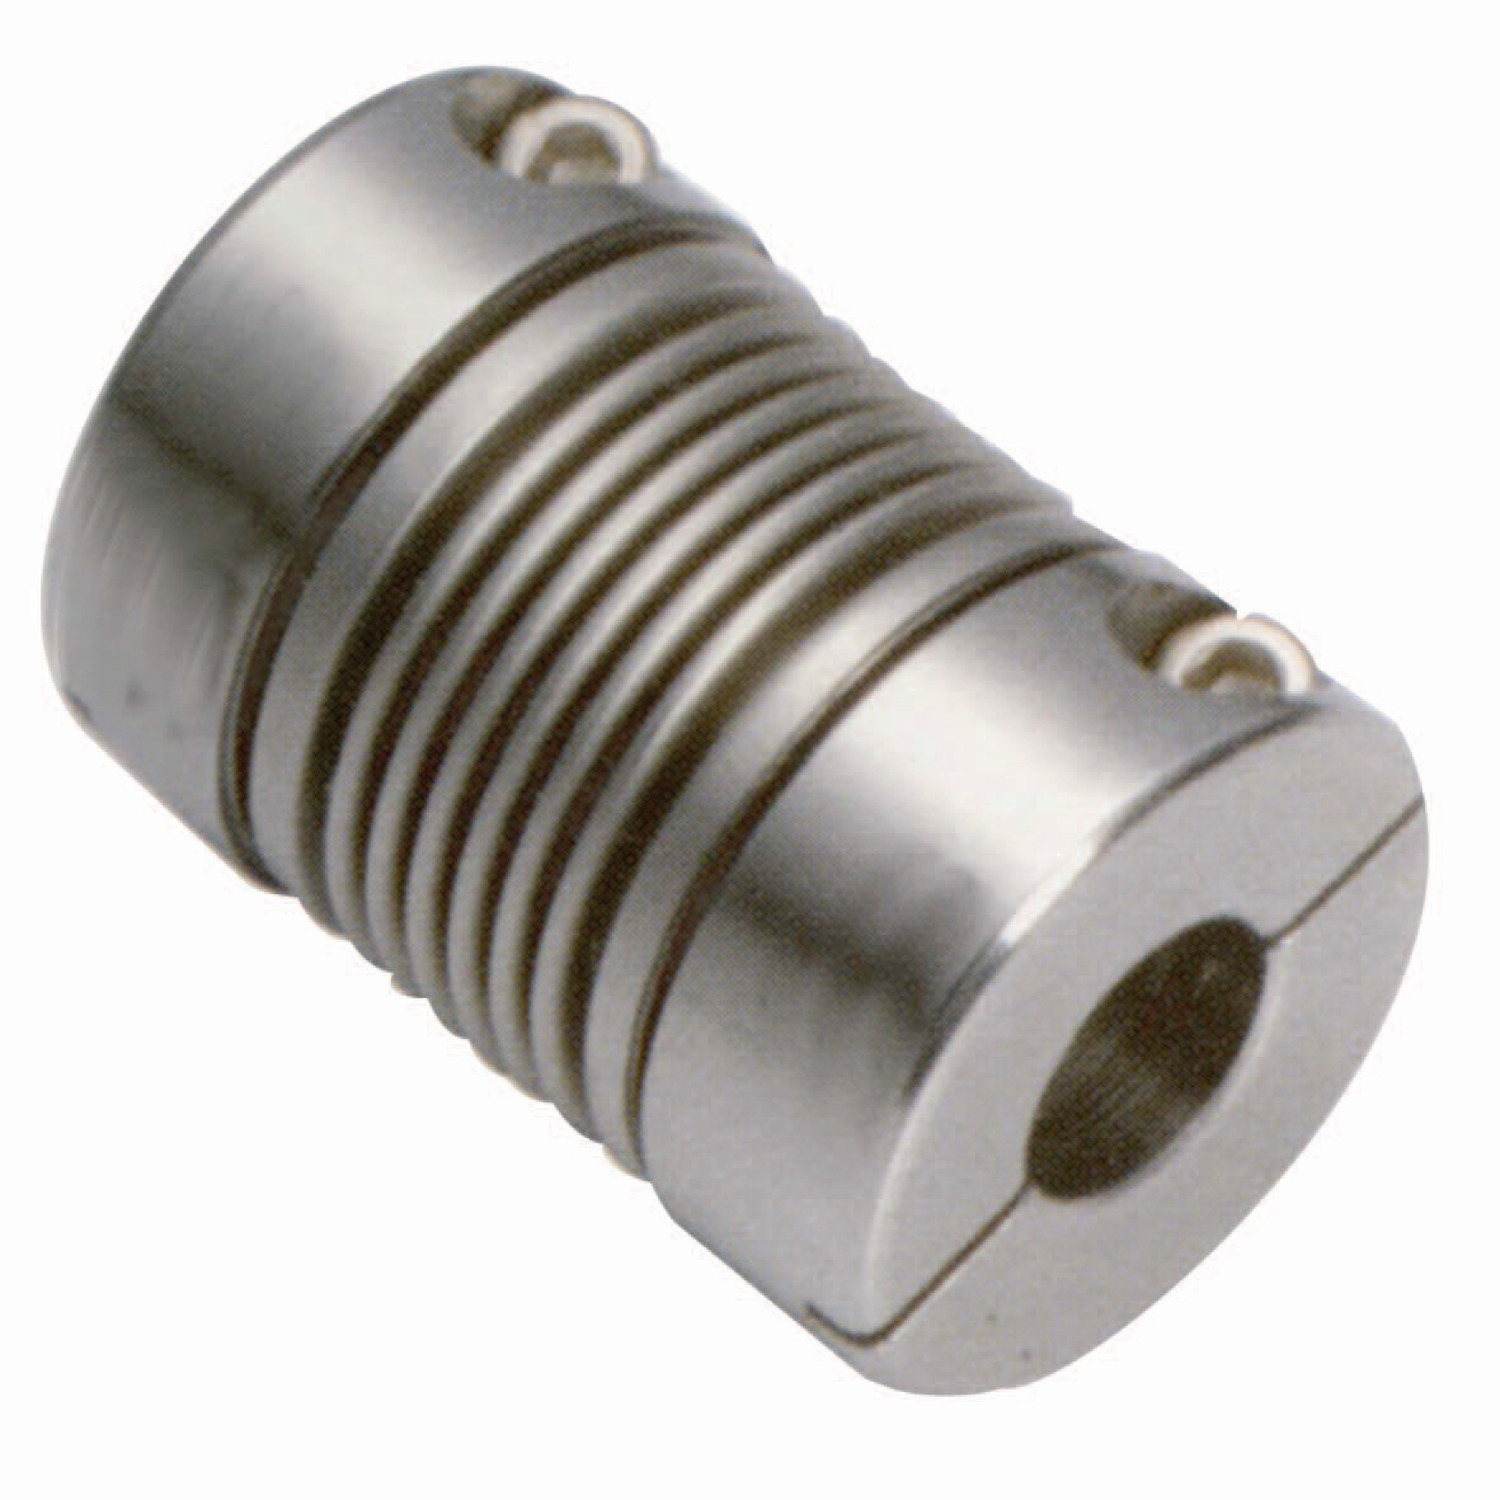 Product R3010.1, Bellows Coupling - Stainless steel clamp fixing / 